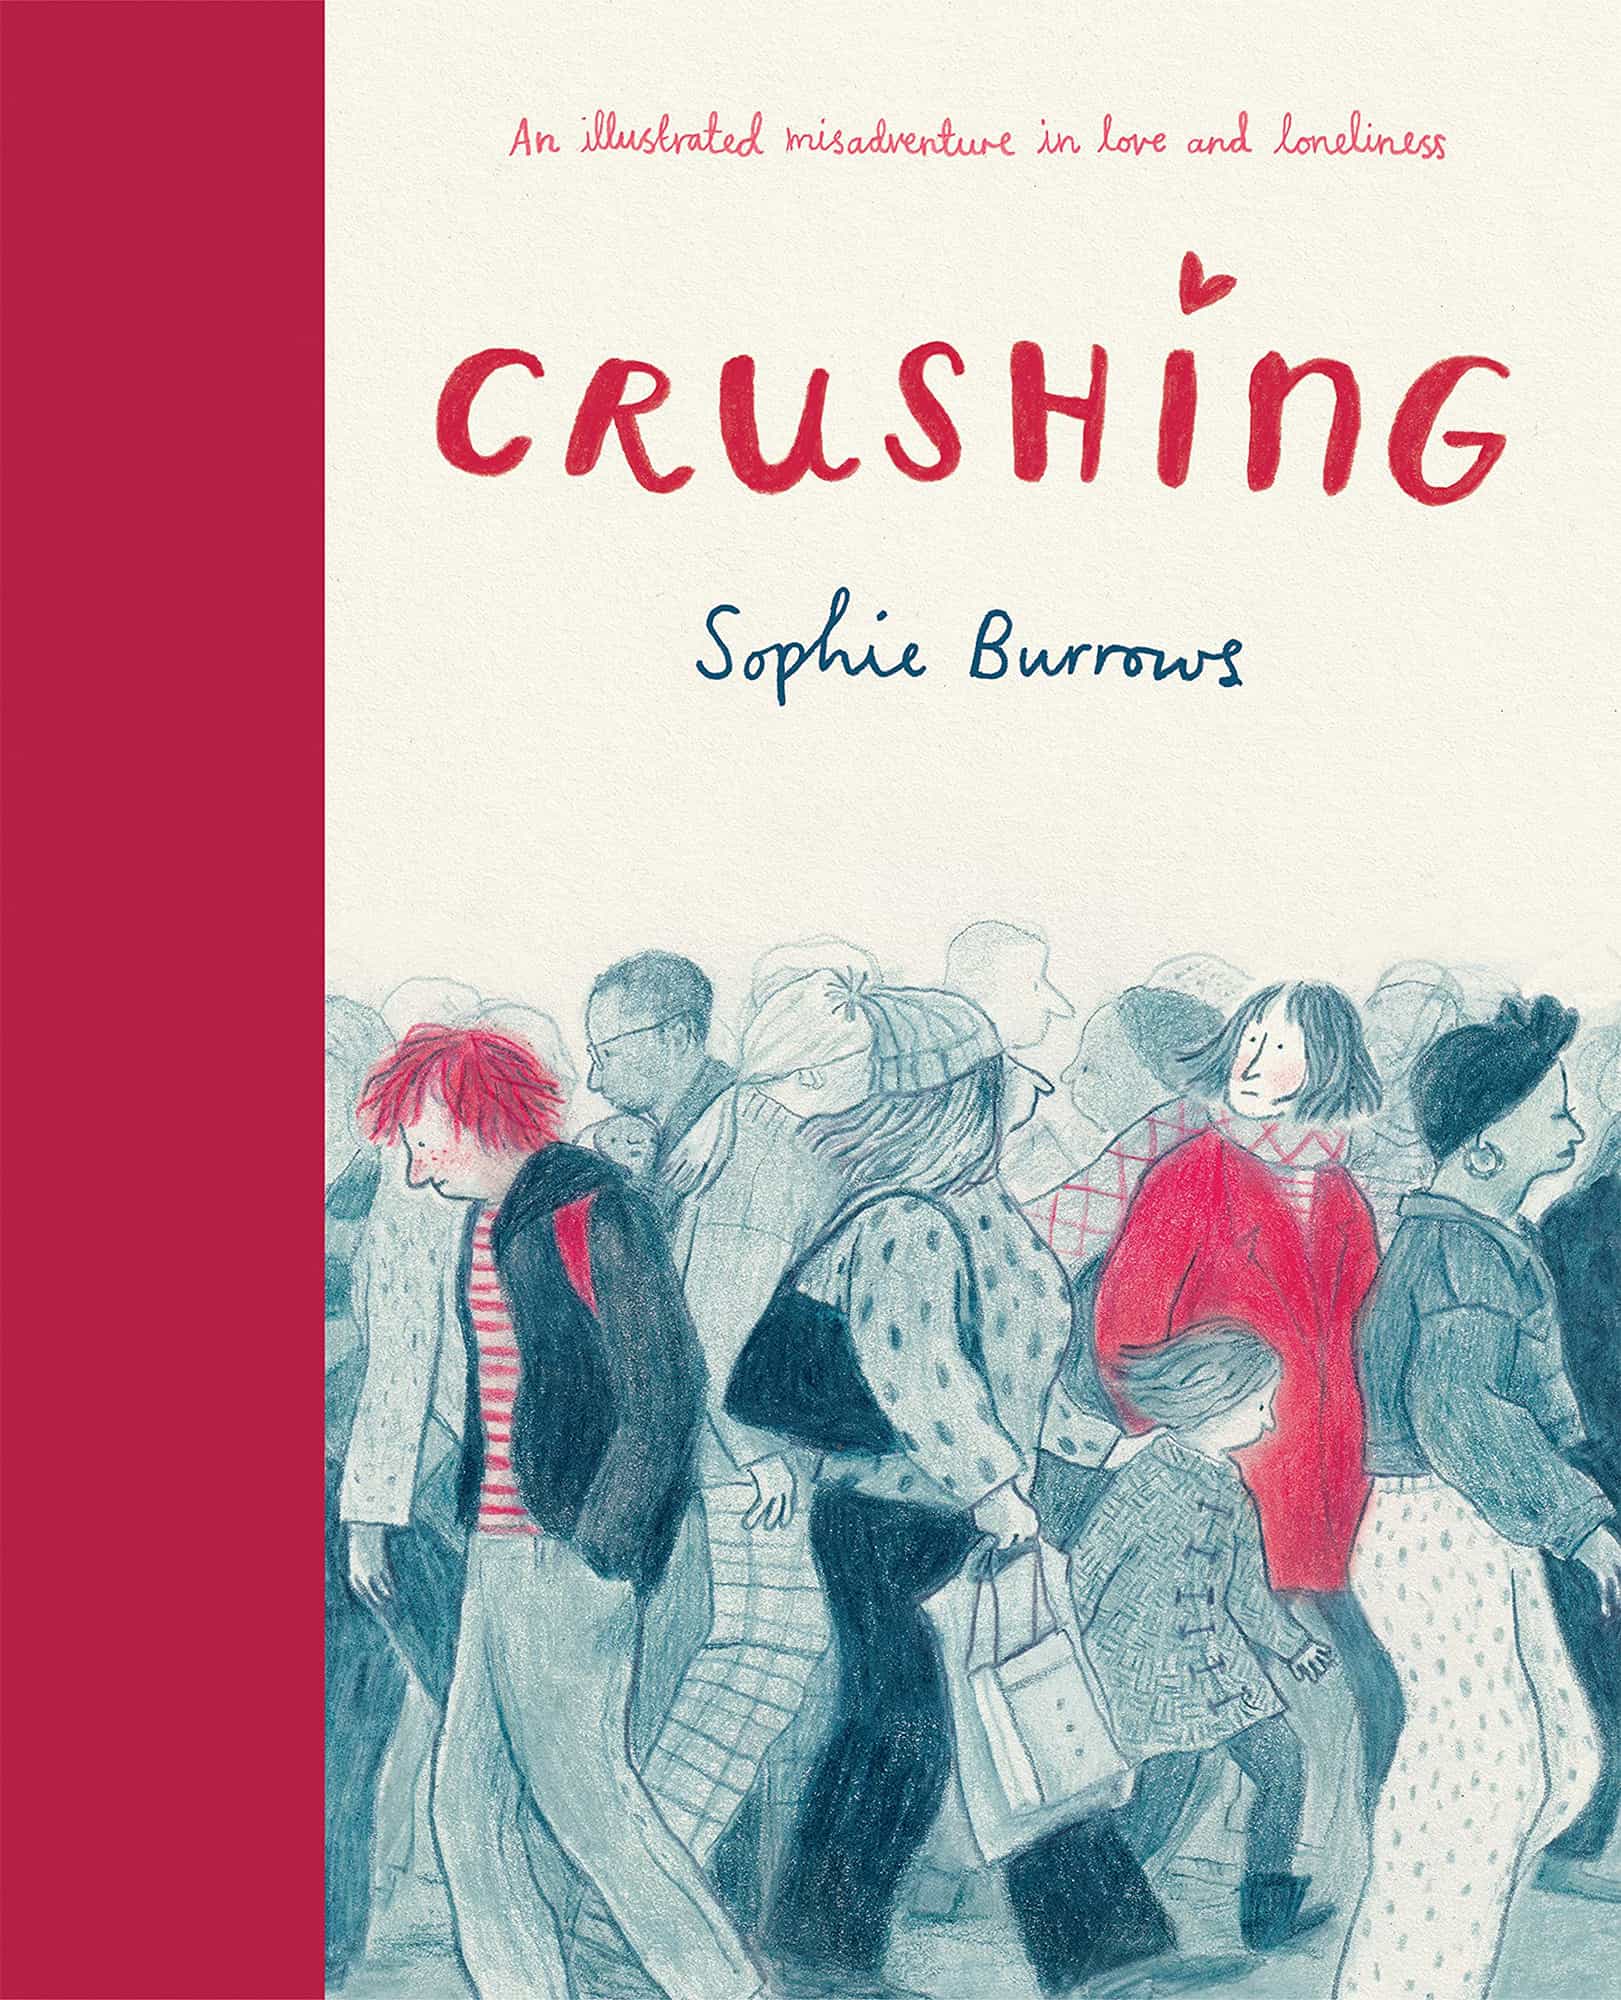 Crushing : An Illustrated Misadventure in Love and Loneliness